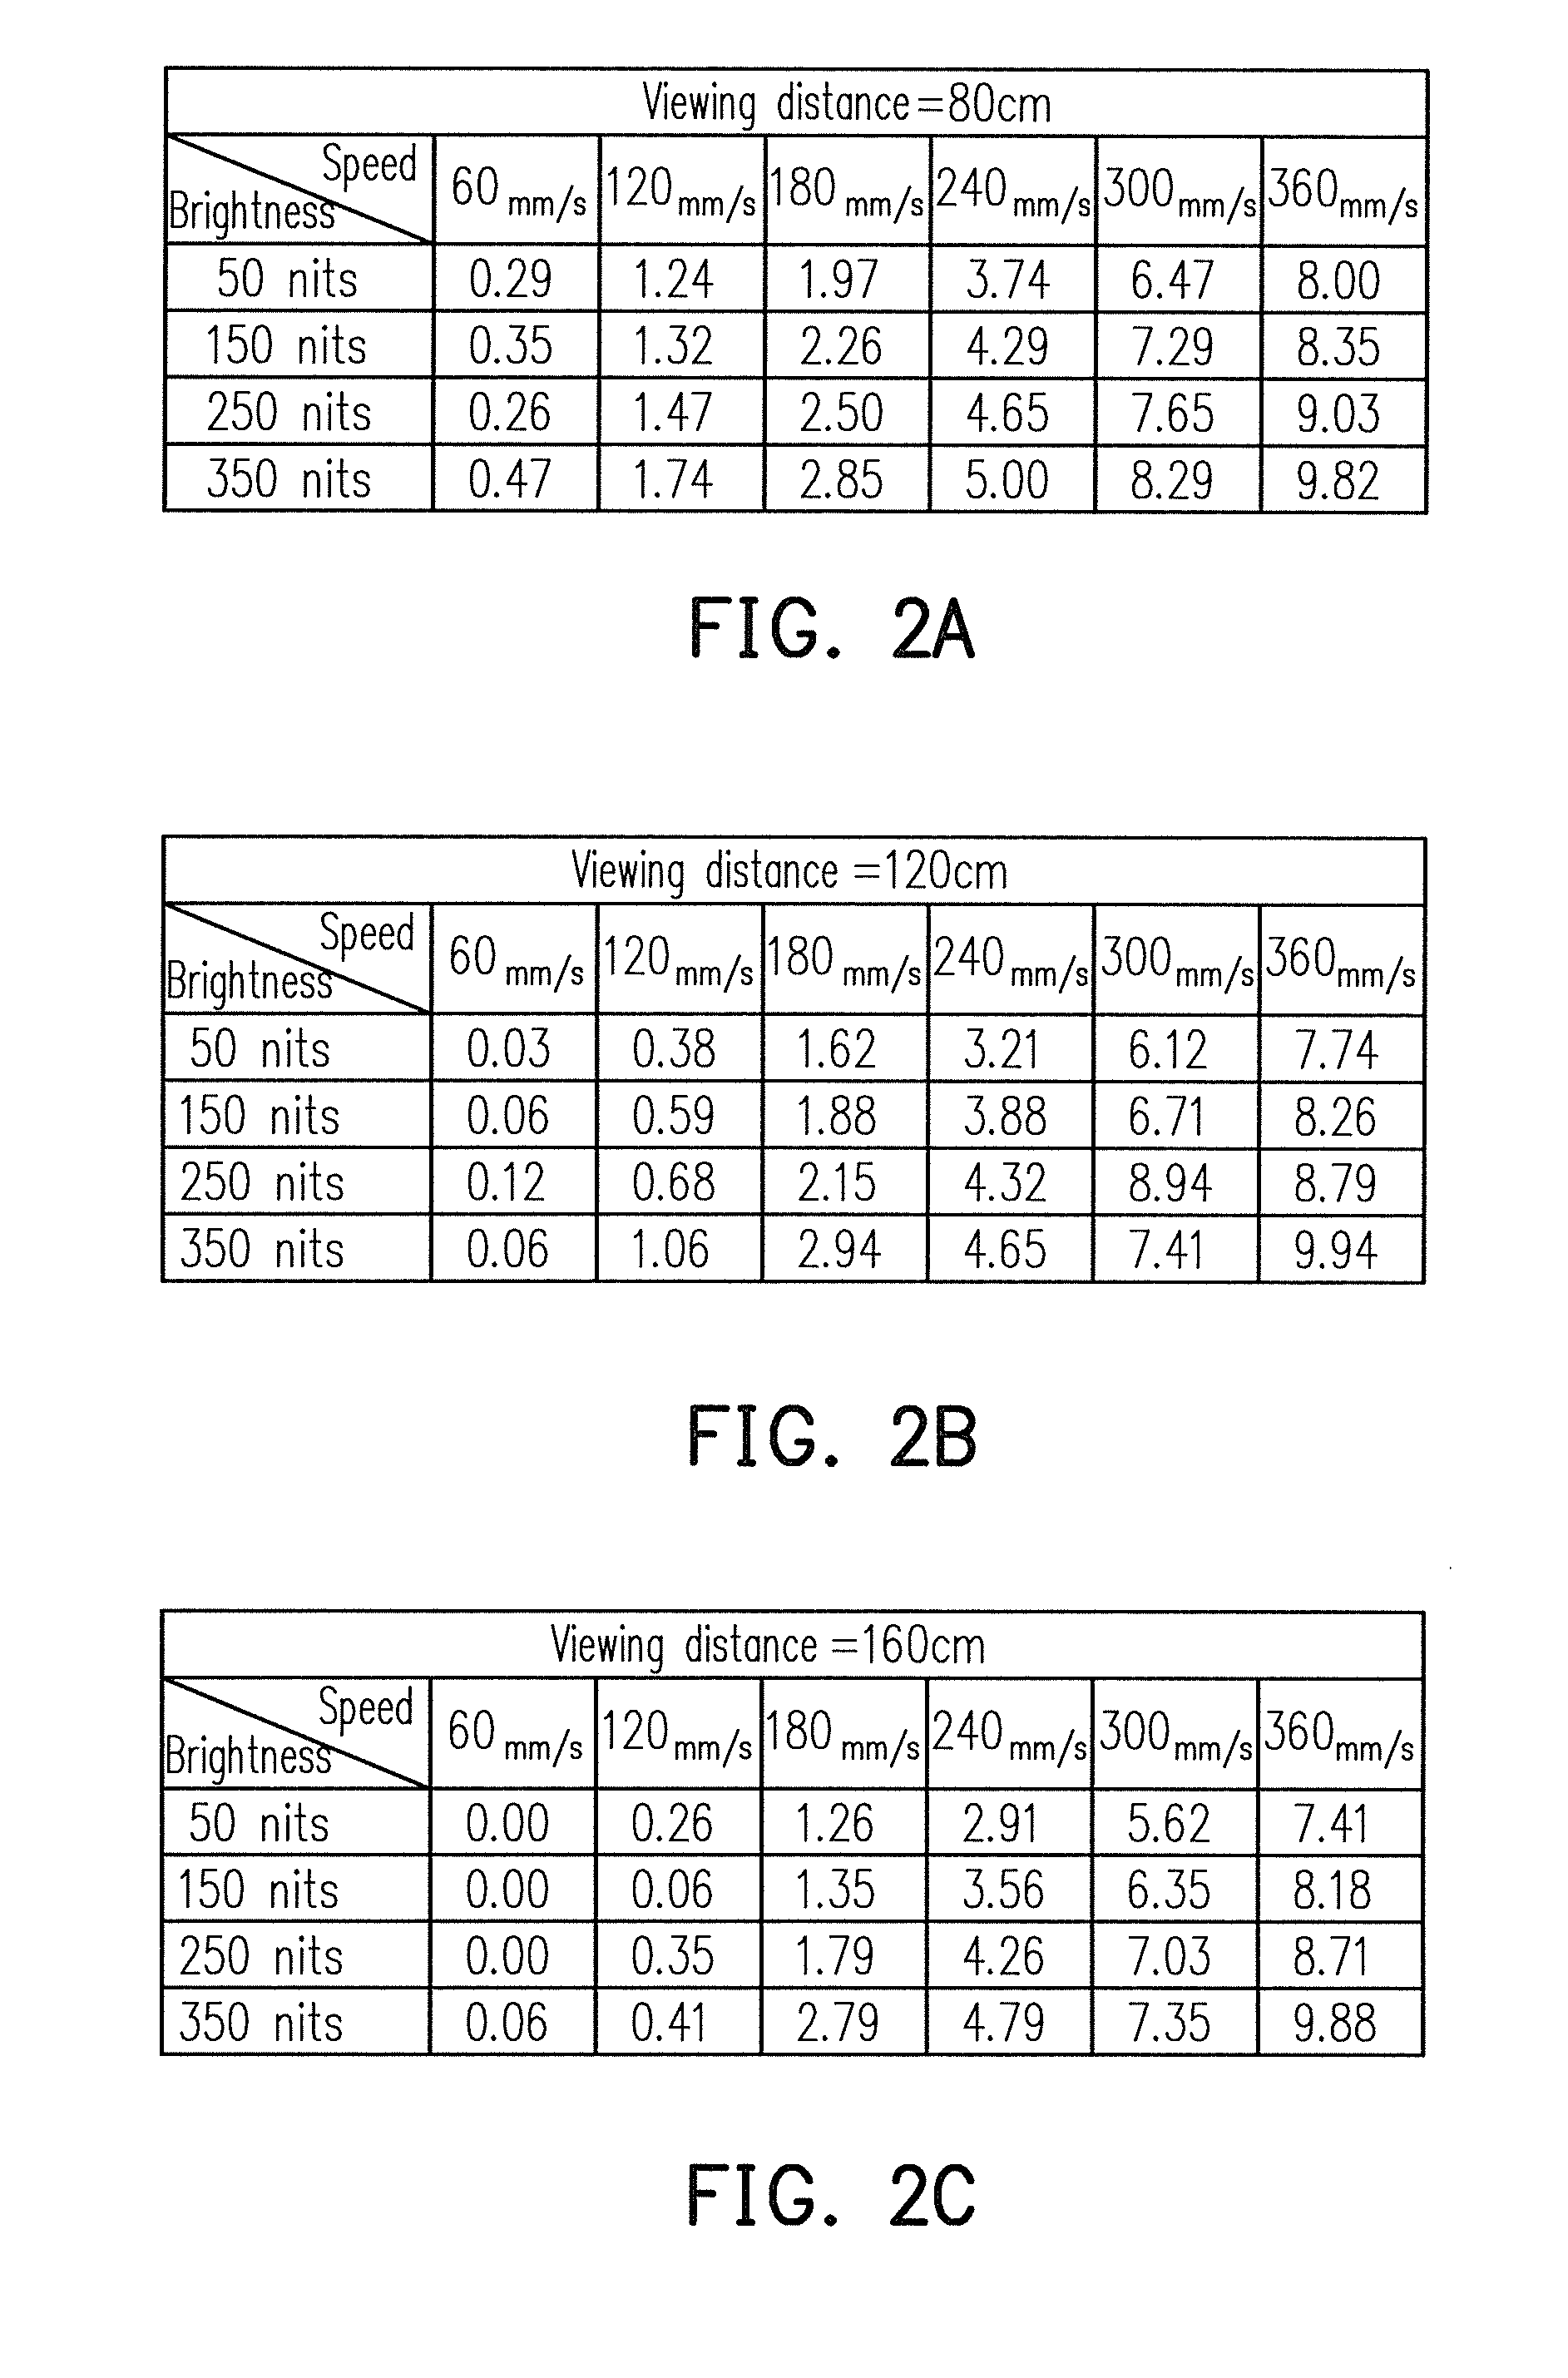 Color sequential method for displaying images